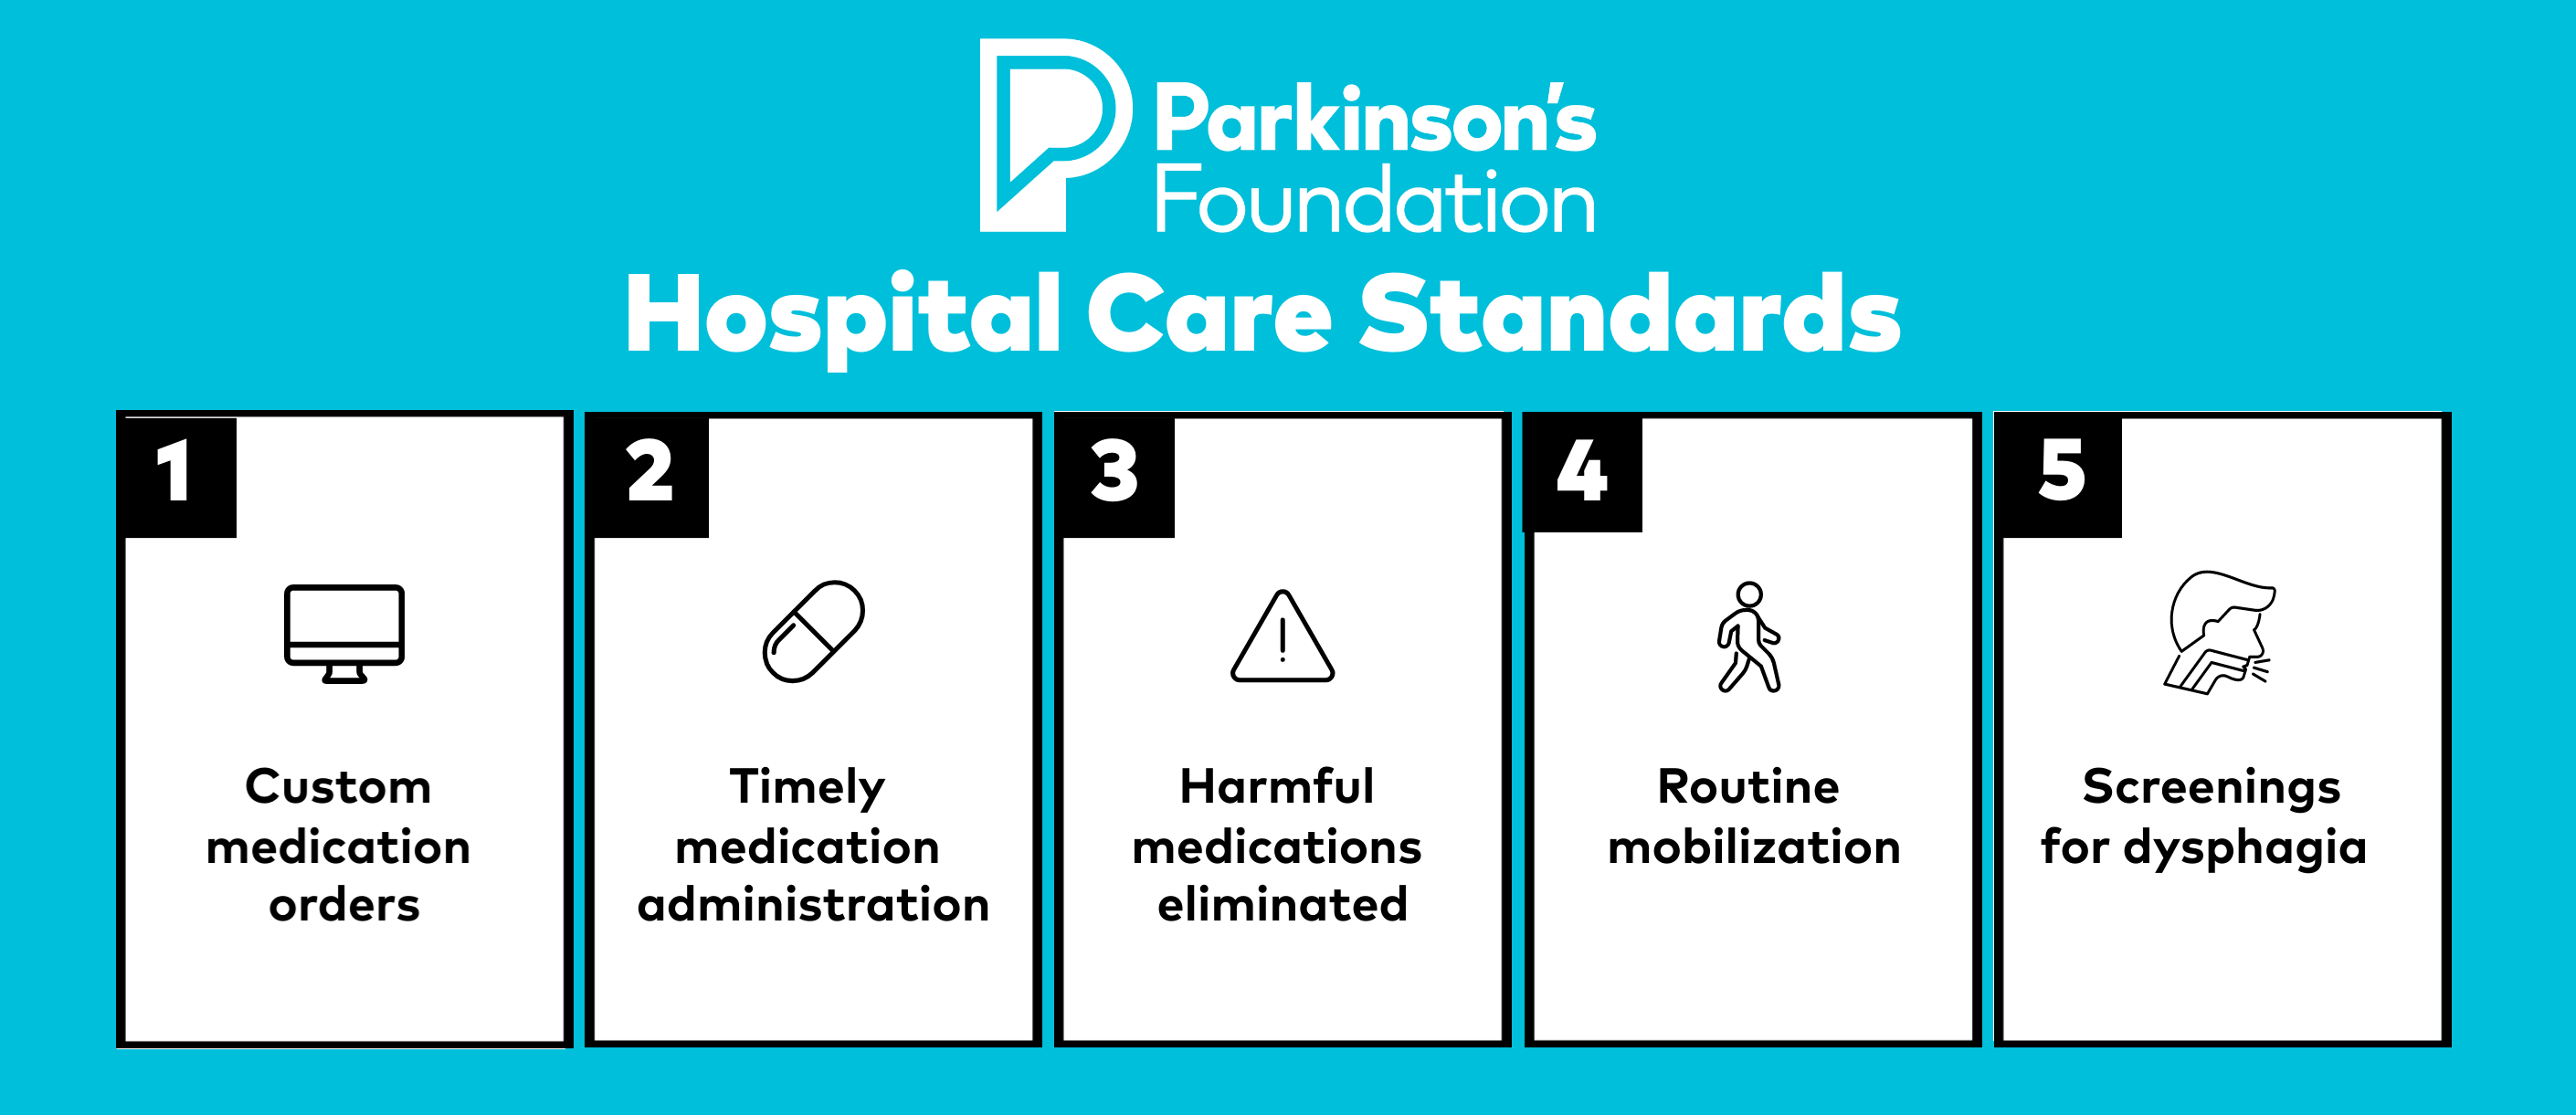 Hospital Care Standards Infographic